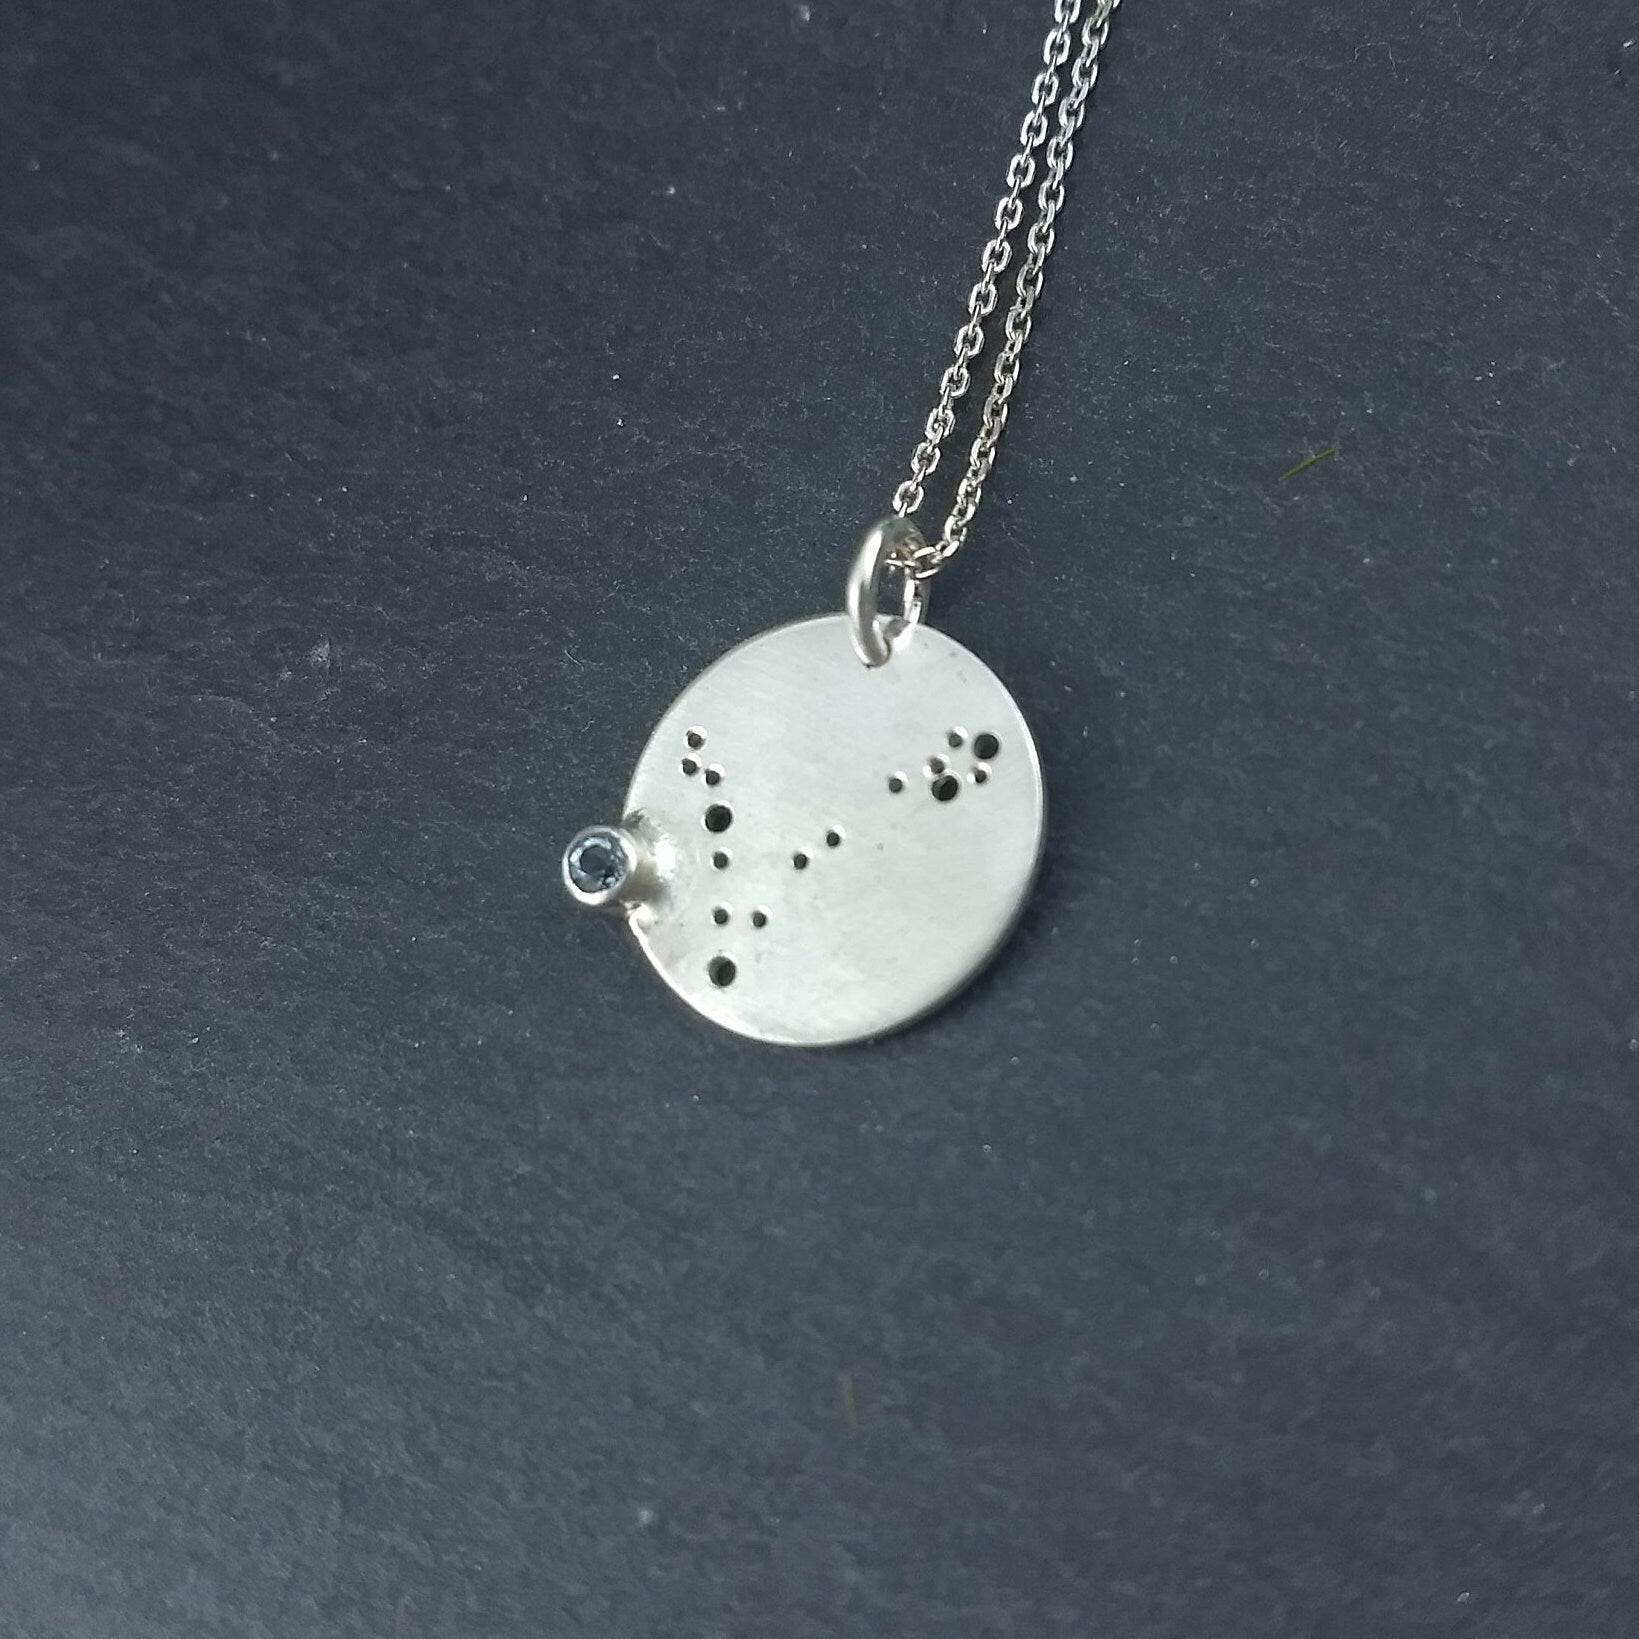 Constellation pendant in sterling silver